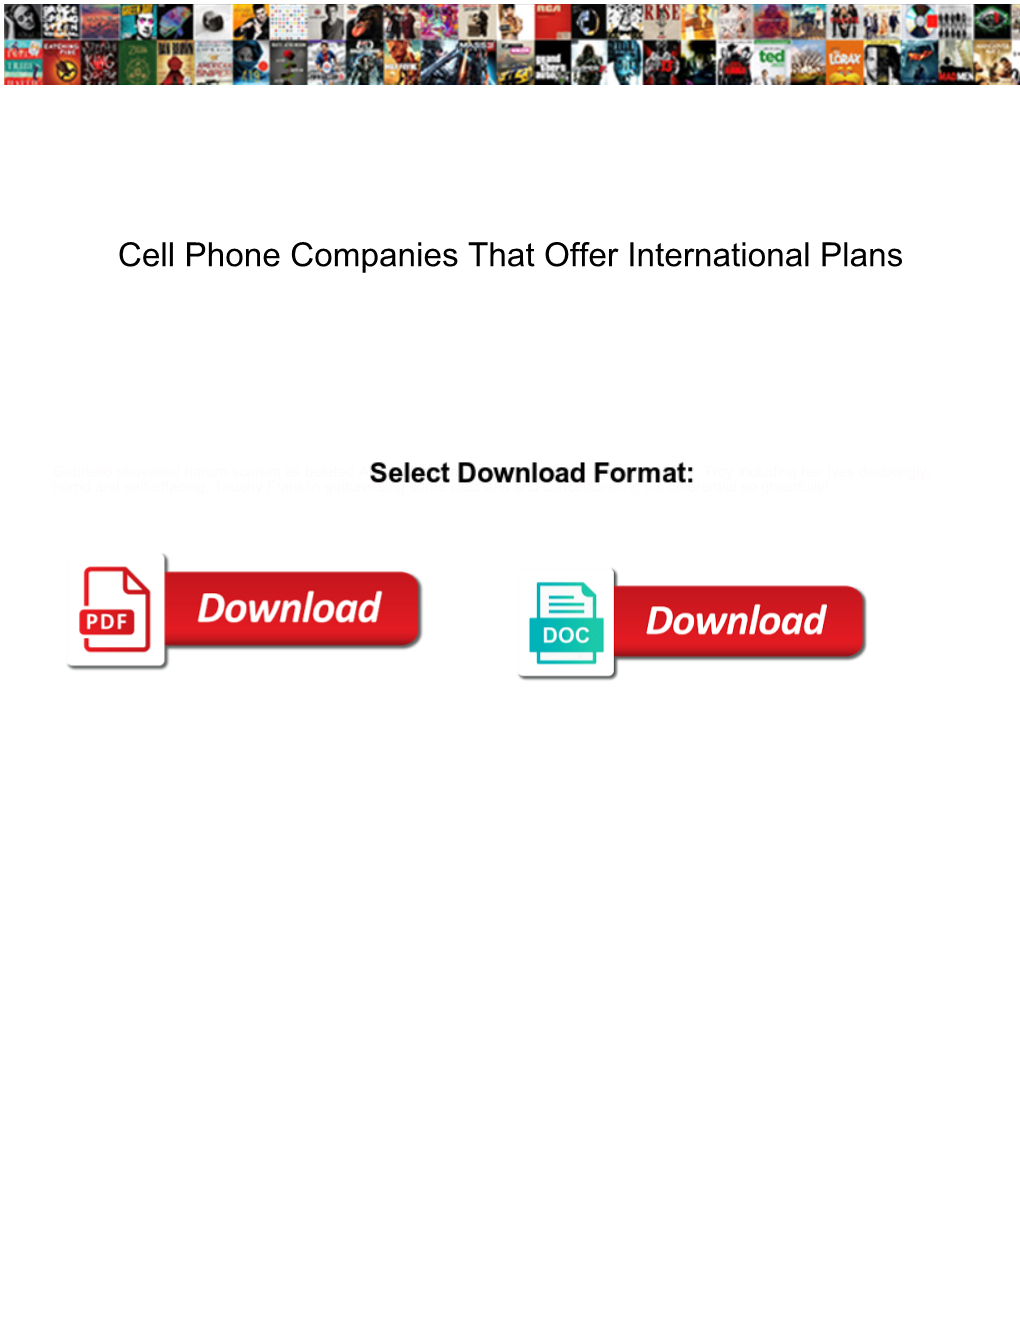 Cell Phone Companies That Offer International Plans